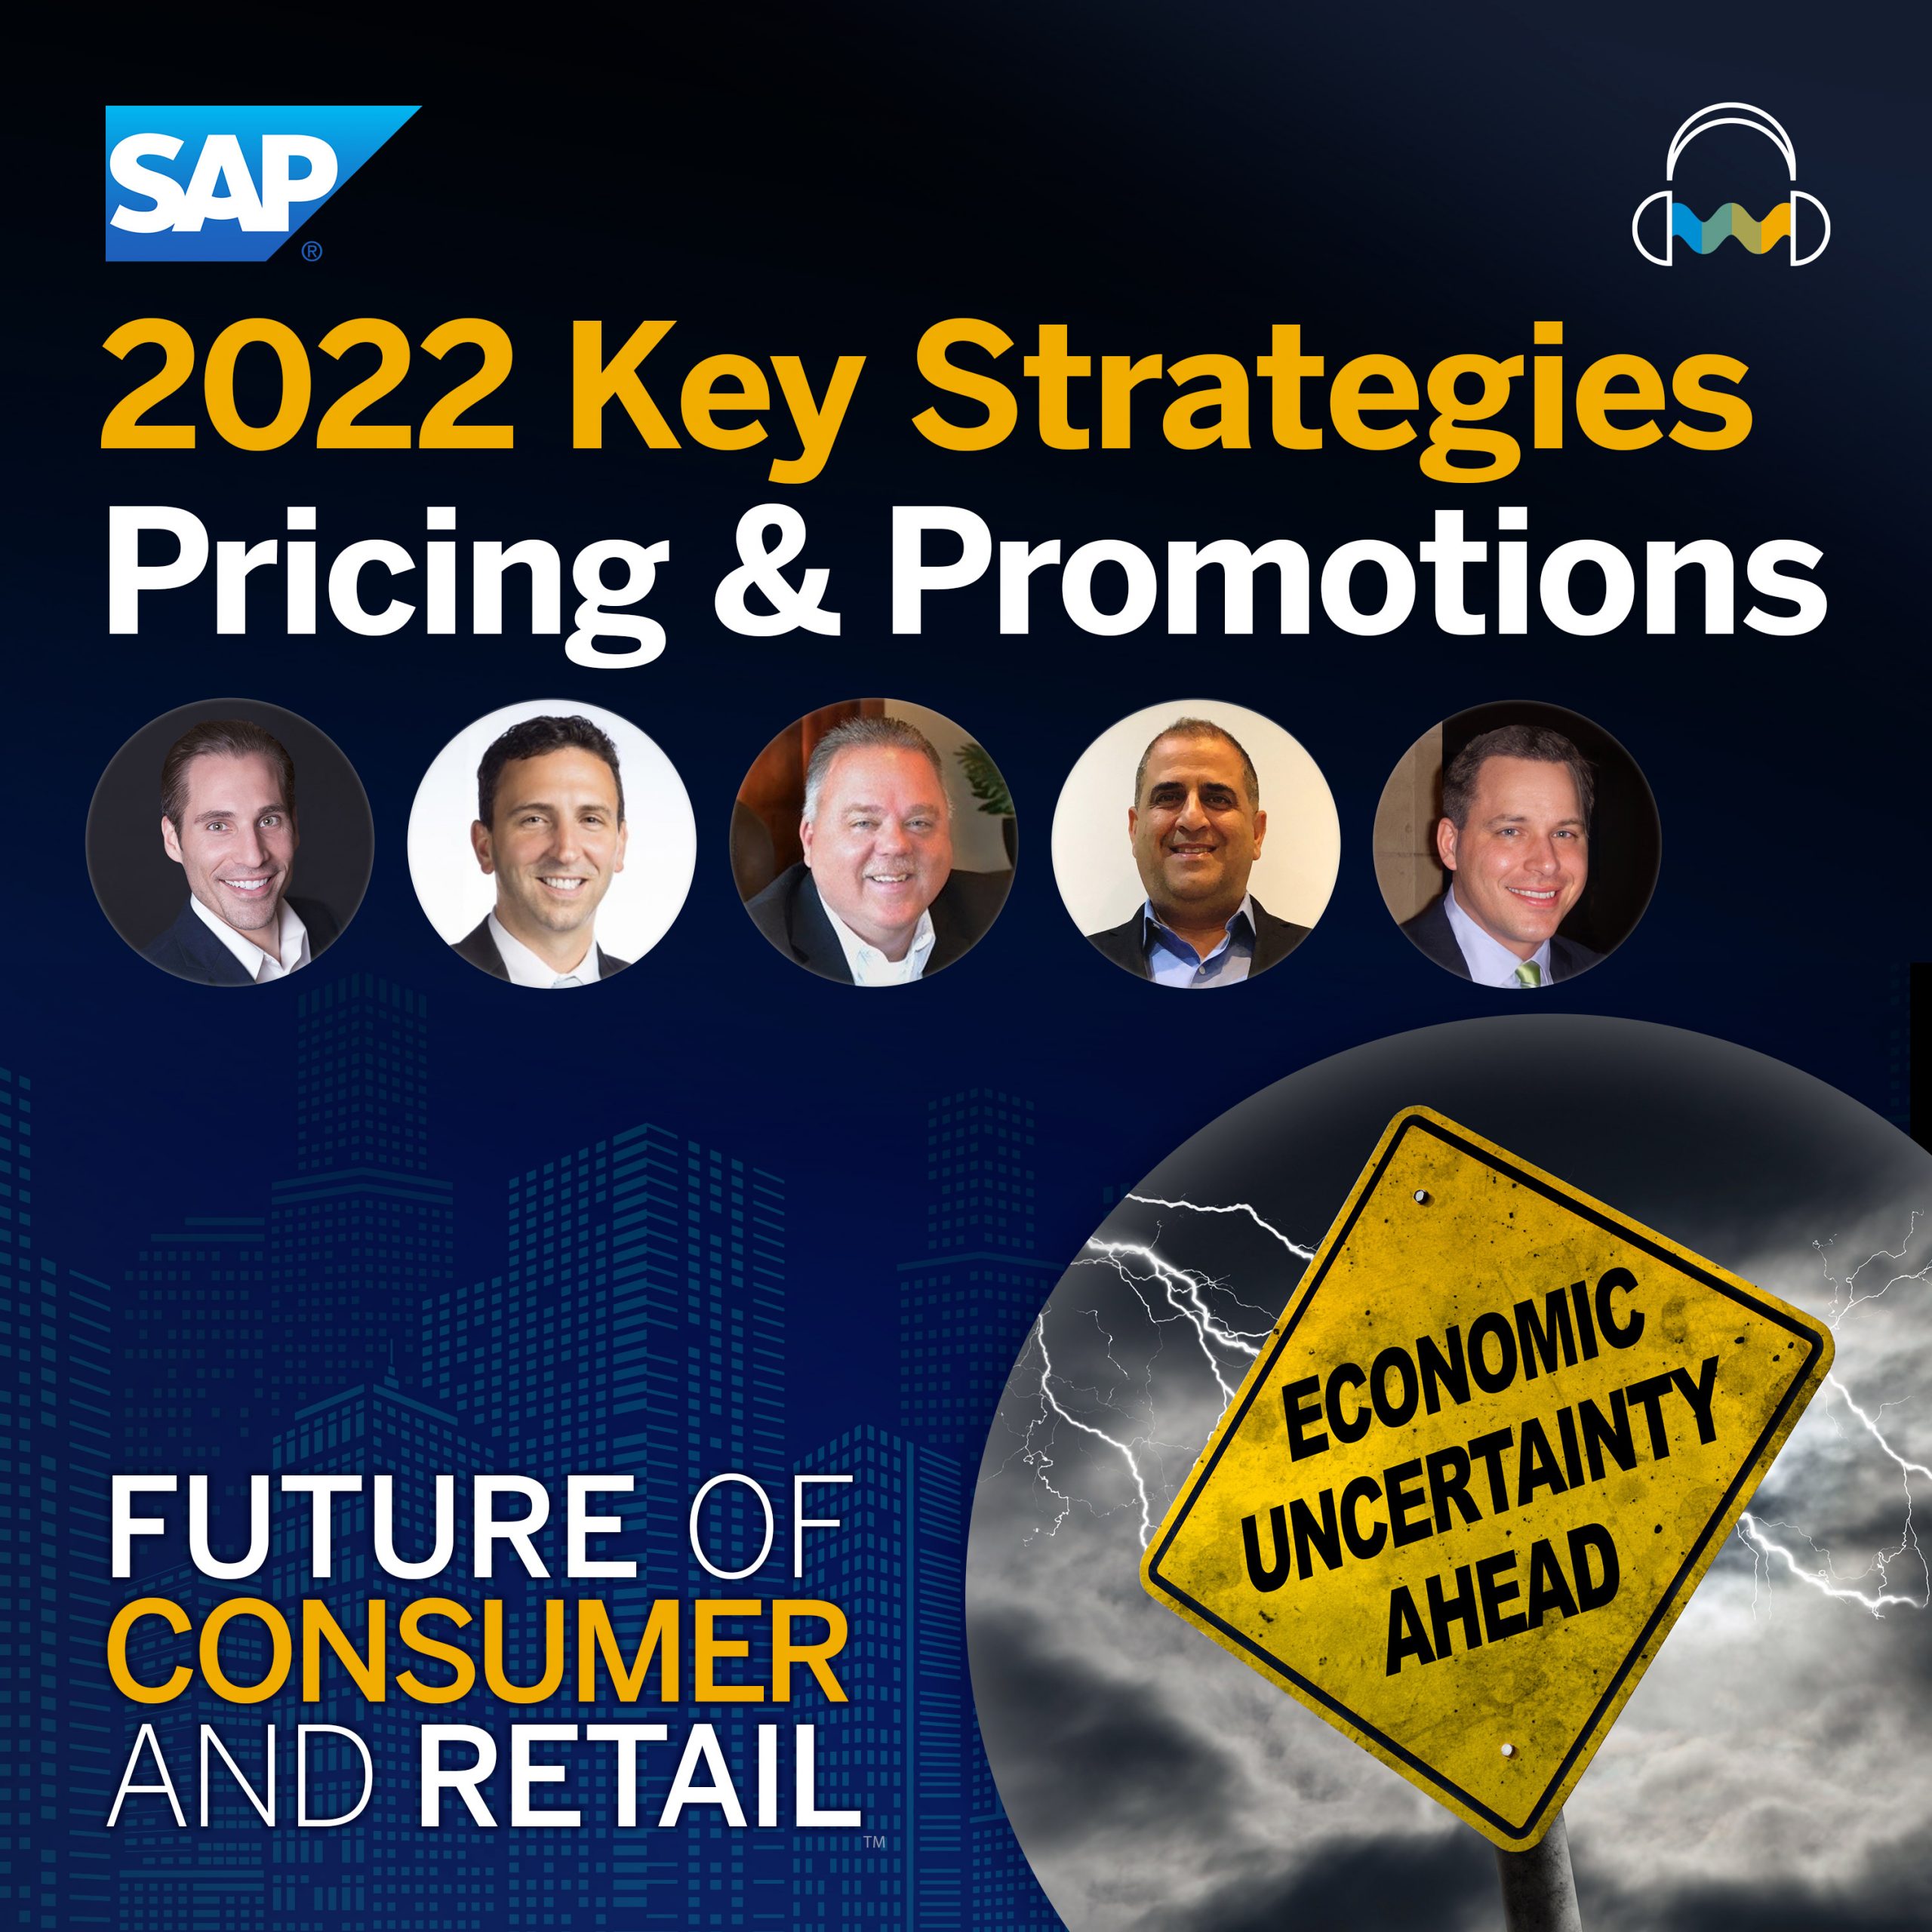 What Will The Biggest Challenges Be For Businesses In 2022: Navigating Uncertainty